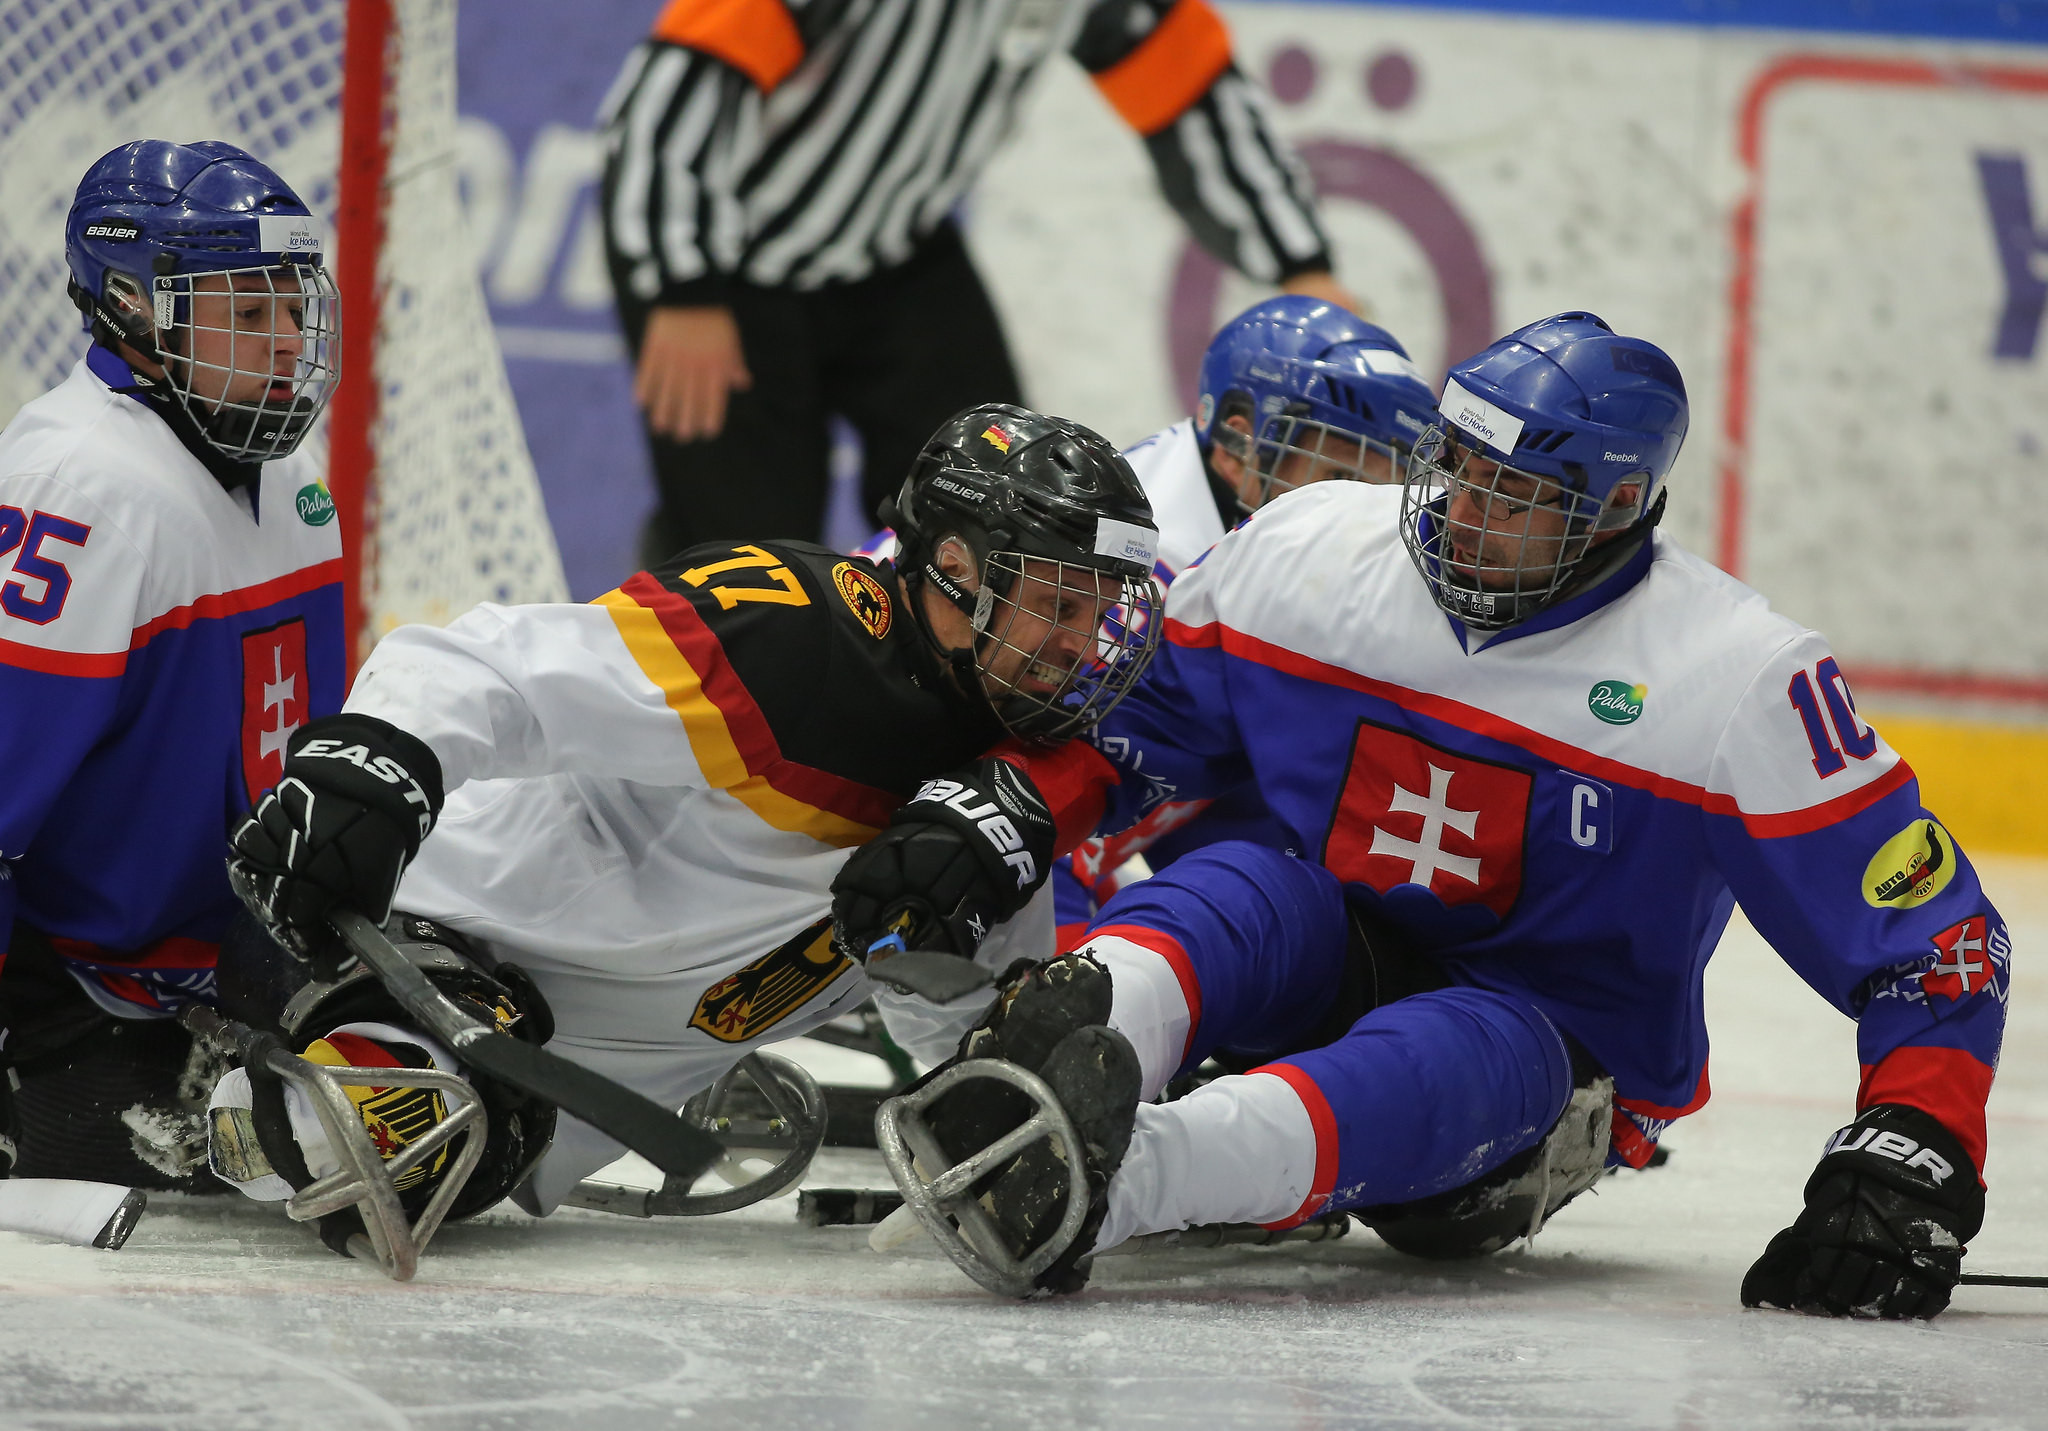 Germany enjoyed a straightforward win over Slovakia in the second match of the day ©IPC/Flickr